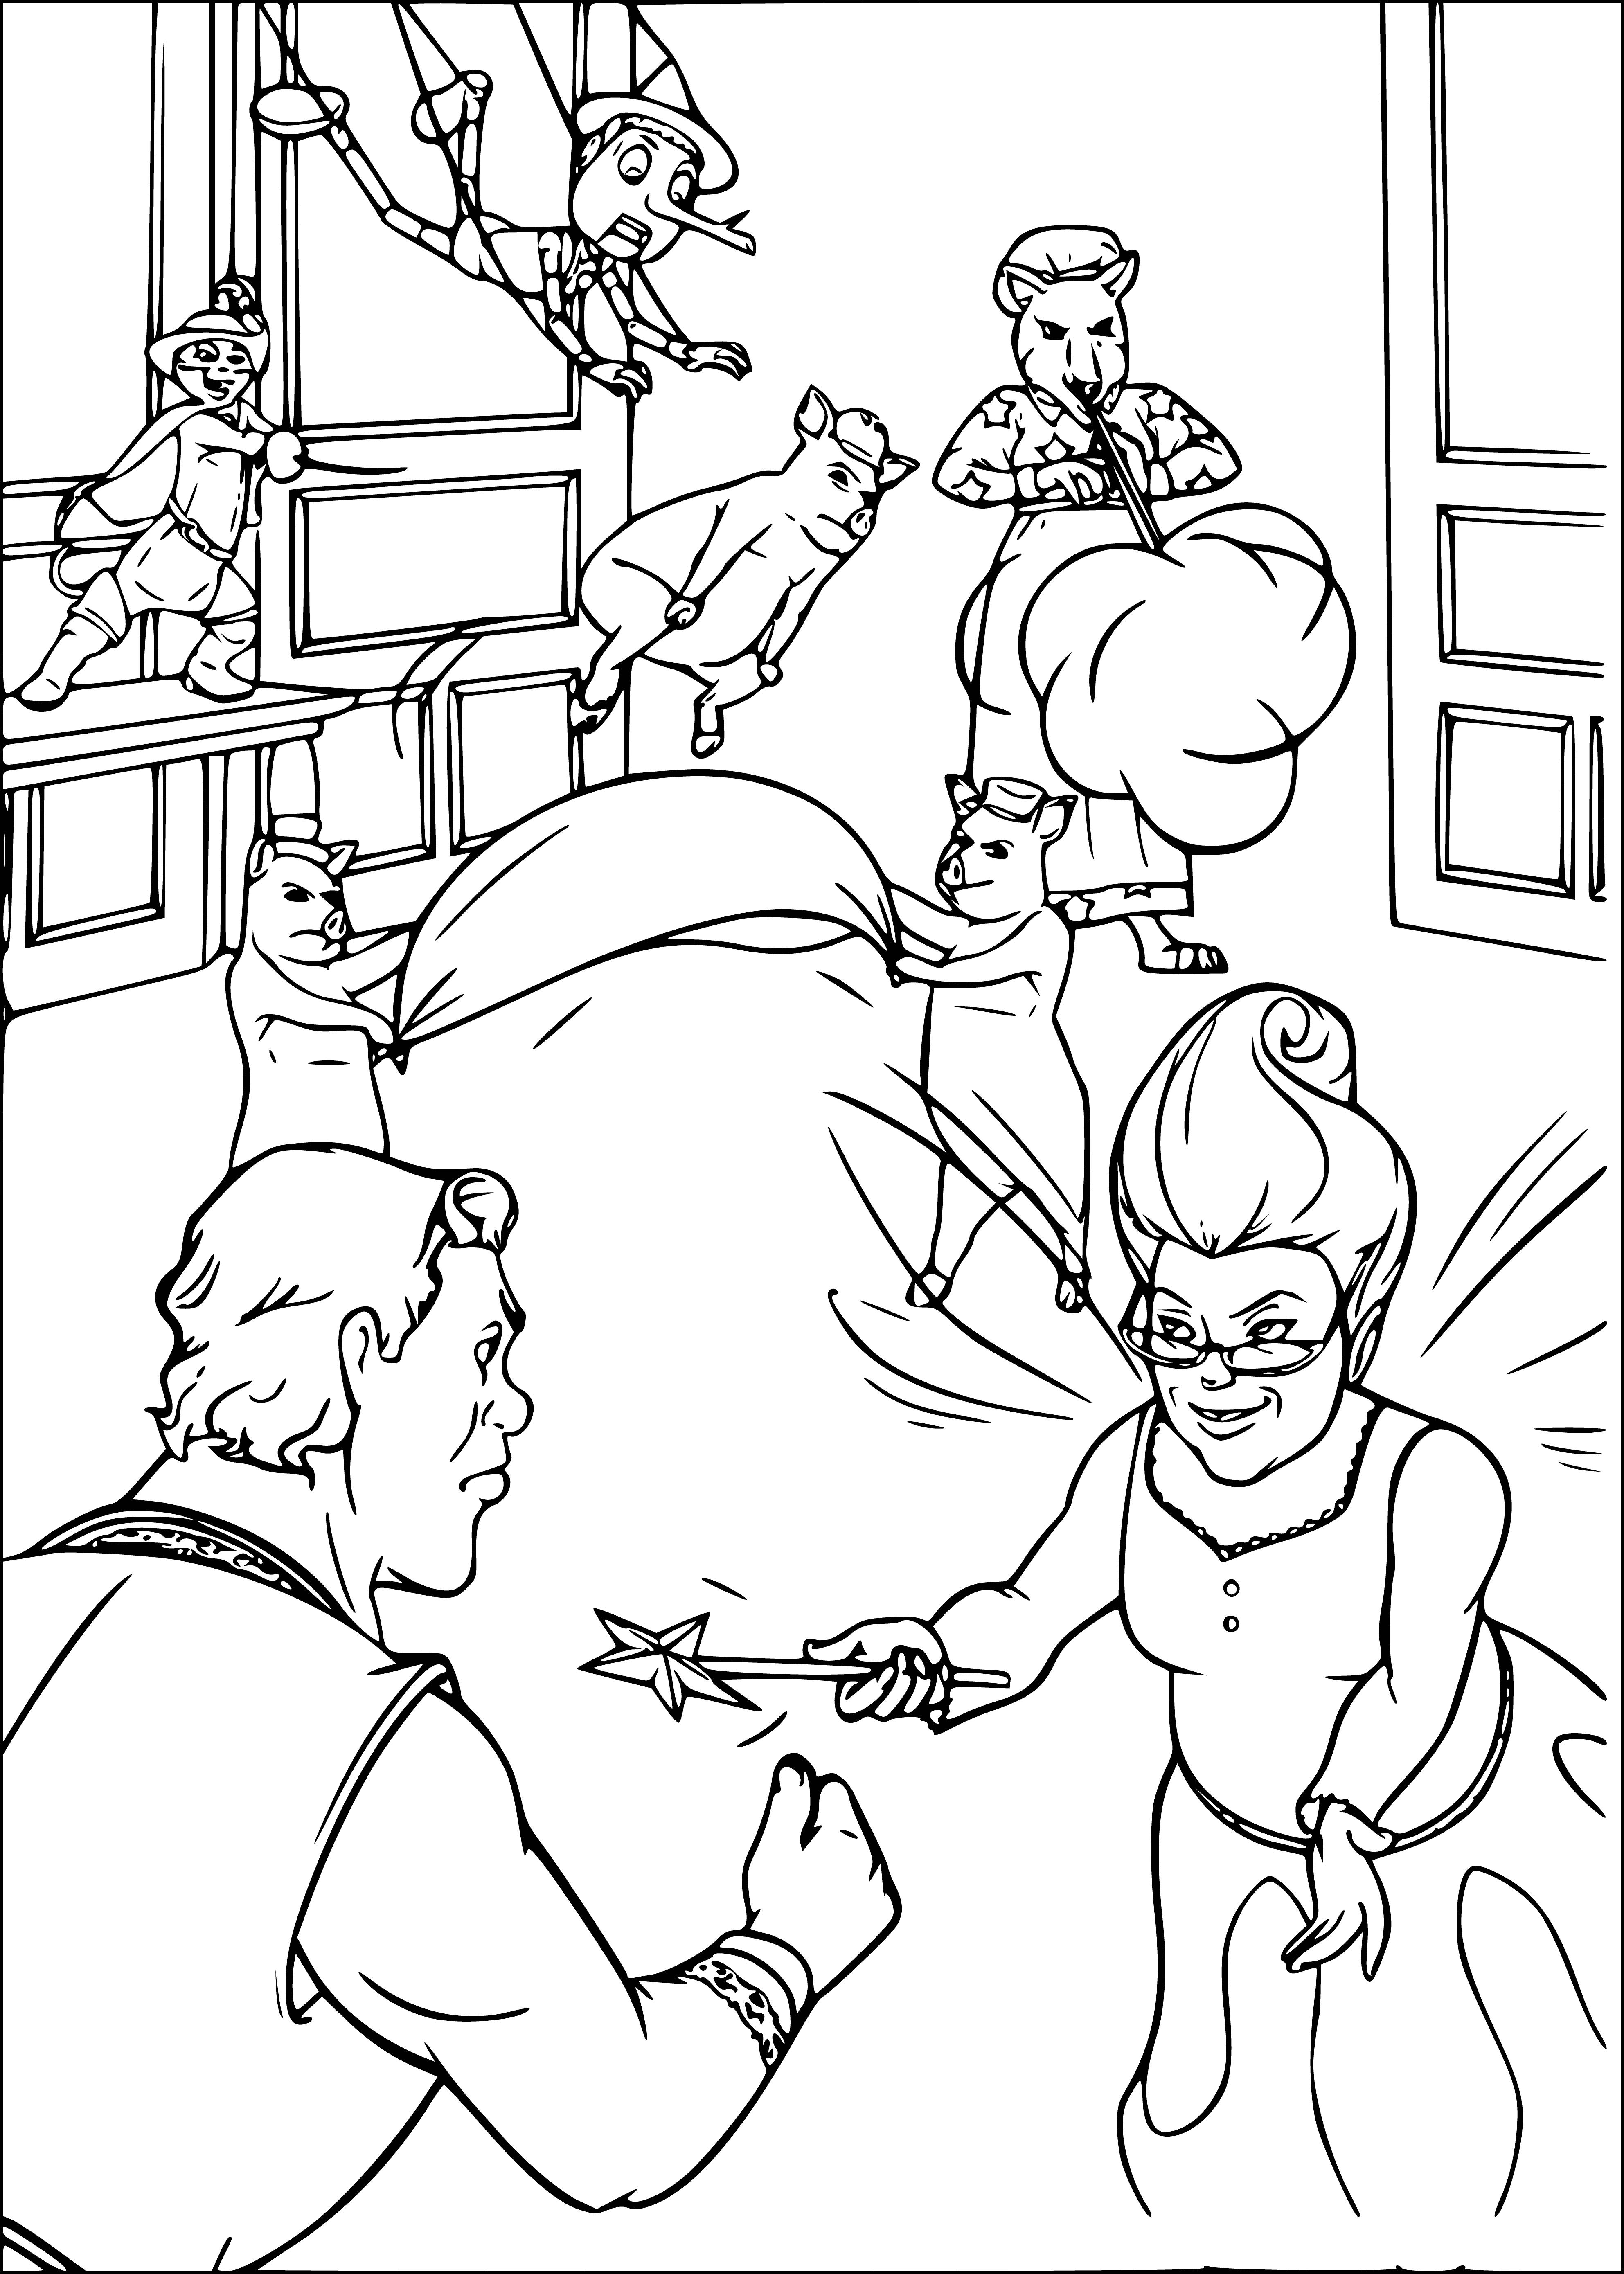 coloring page: Fairy argument turns sour as Shrek remains determined.